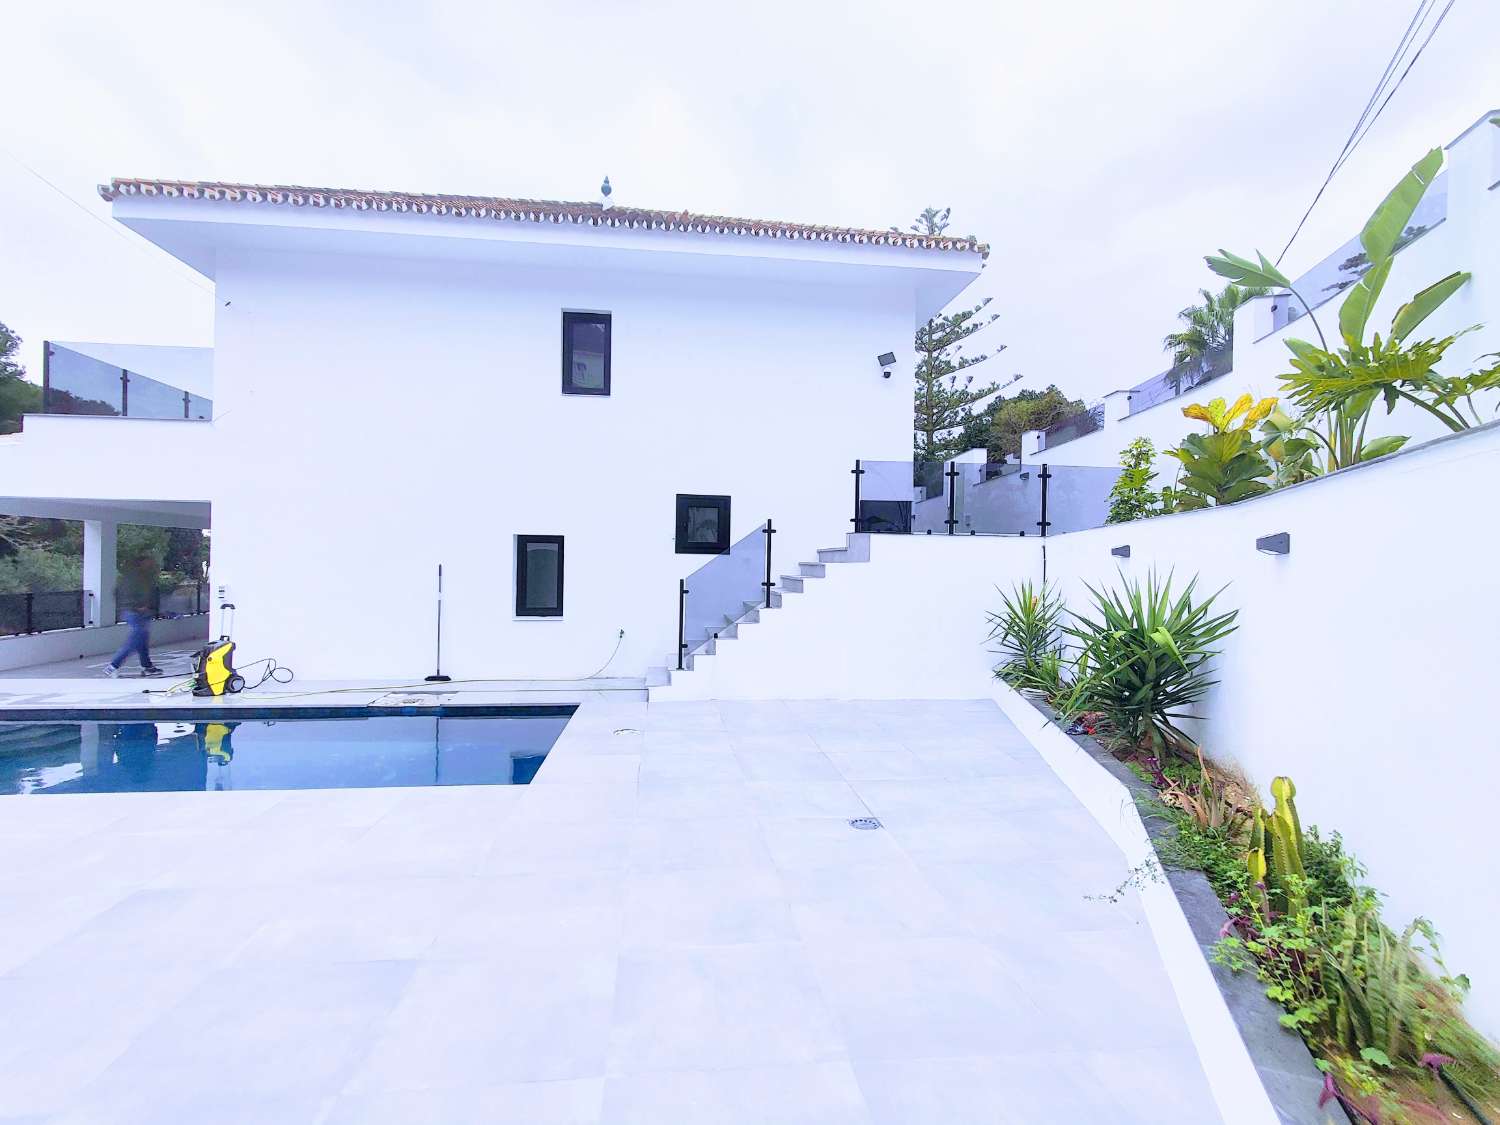 Spectacular Villa in La Cala de Mijas 677 meters in a straight line from the beach and with sea views.